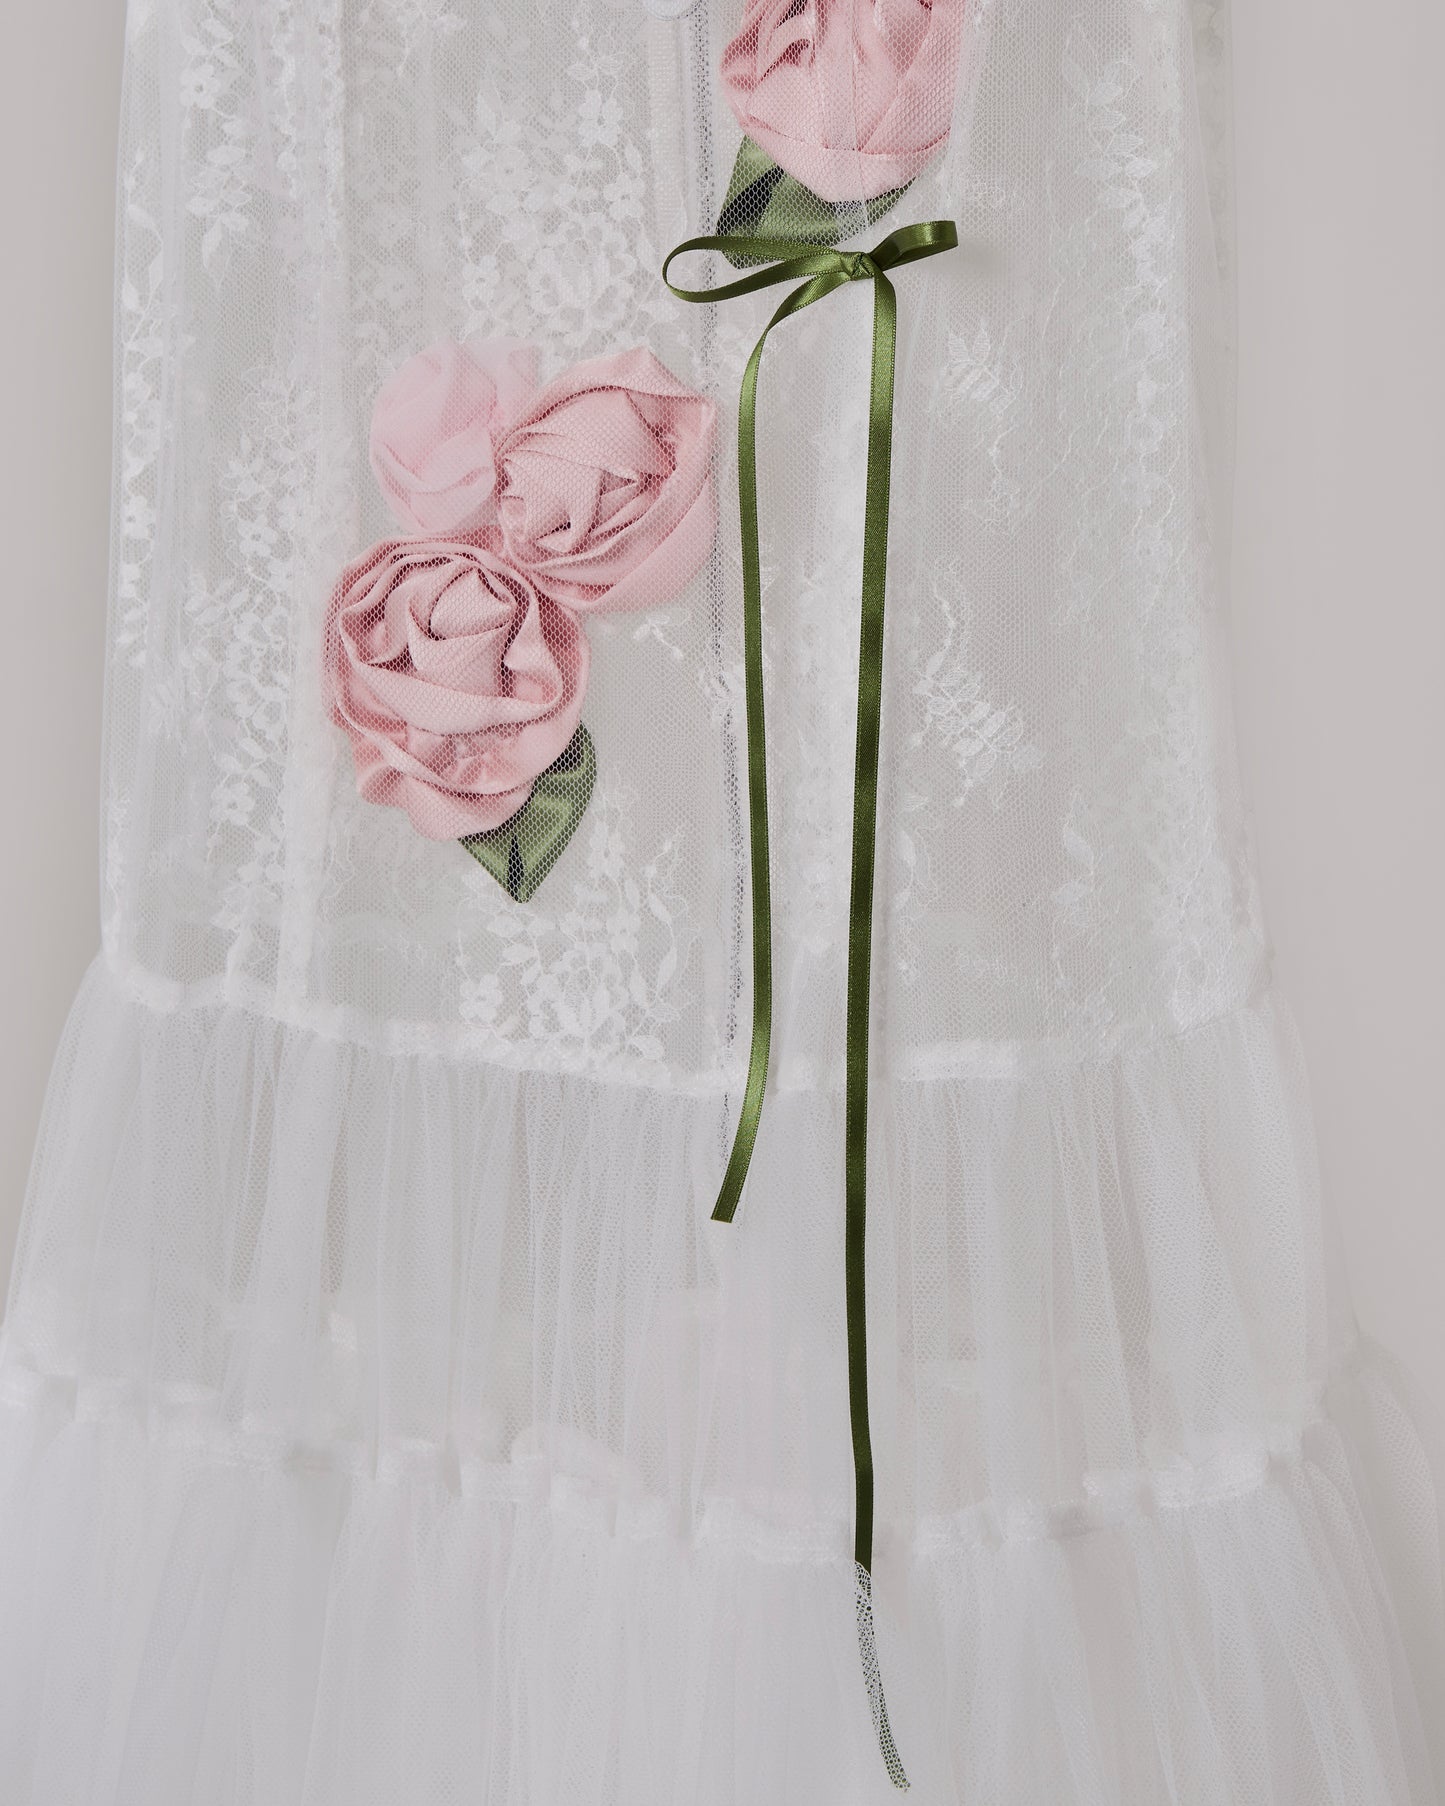 Tulle dress of “Roses in the Painting”